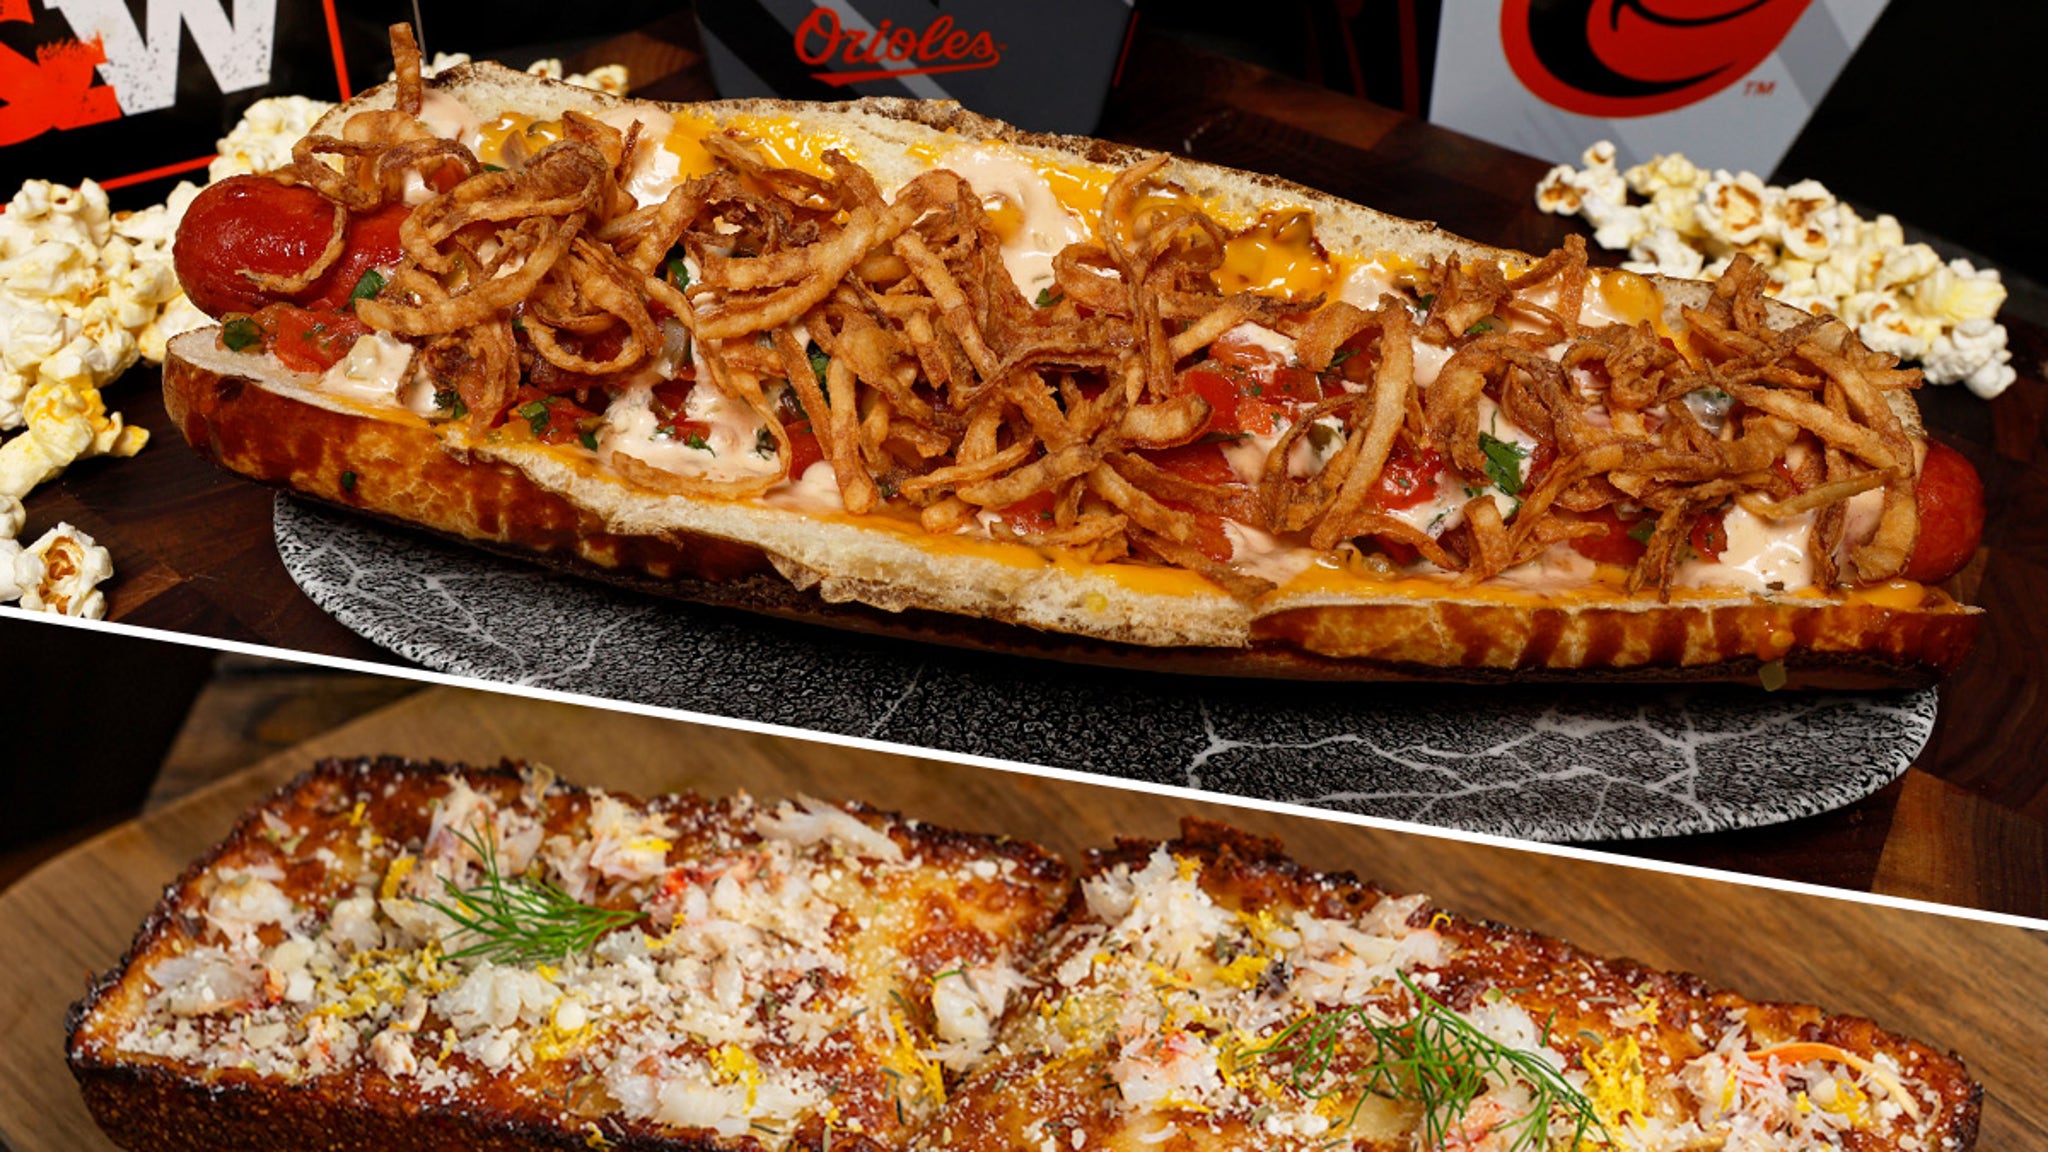 MLB Teams Unveil New Dishes For Opening Day, Crab Pizza & Footlong Hot Dogs